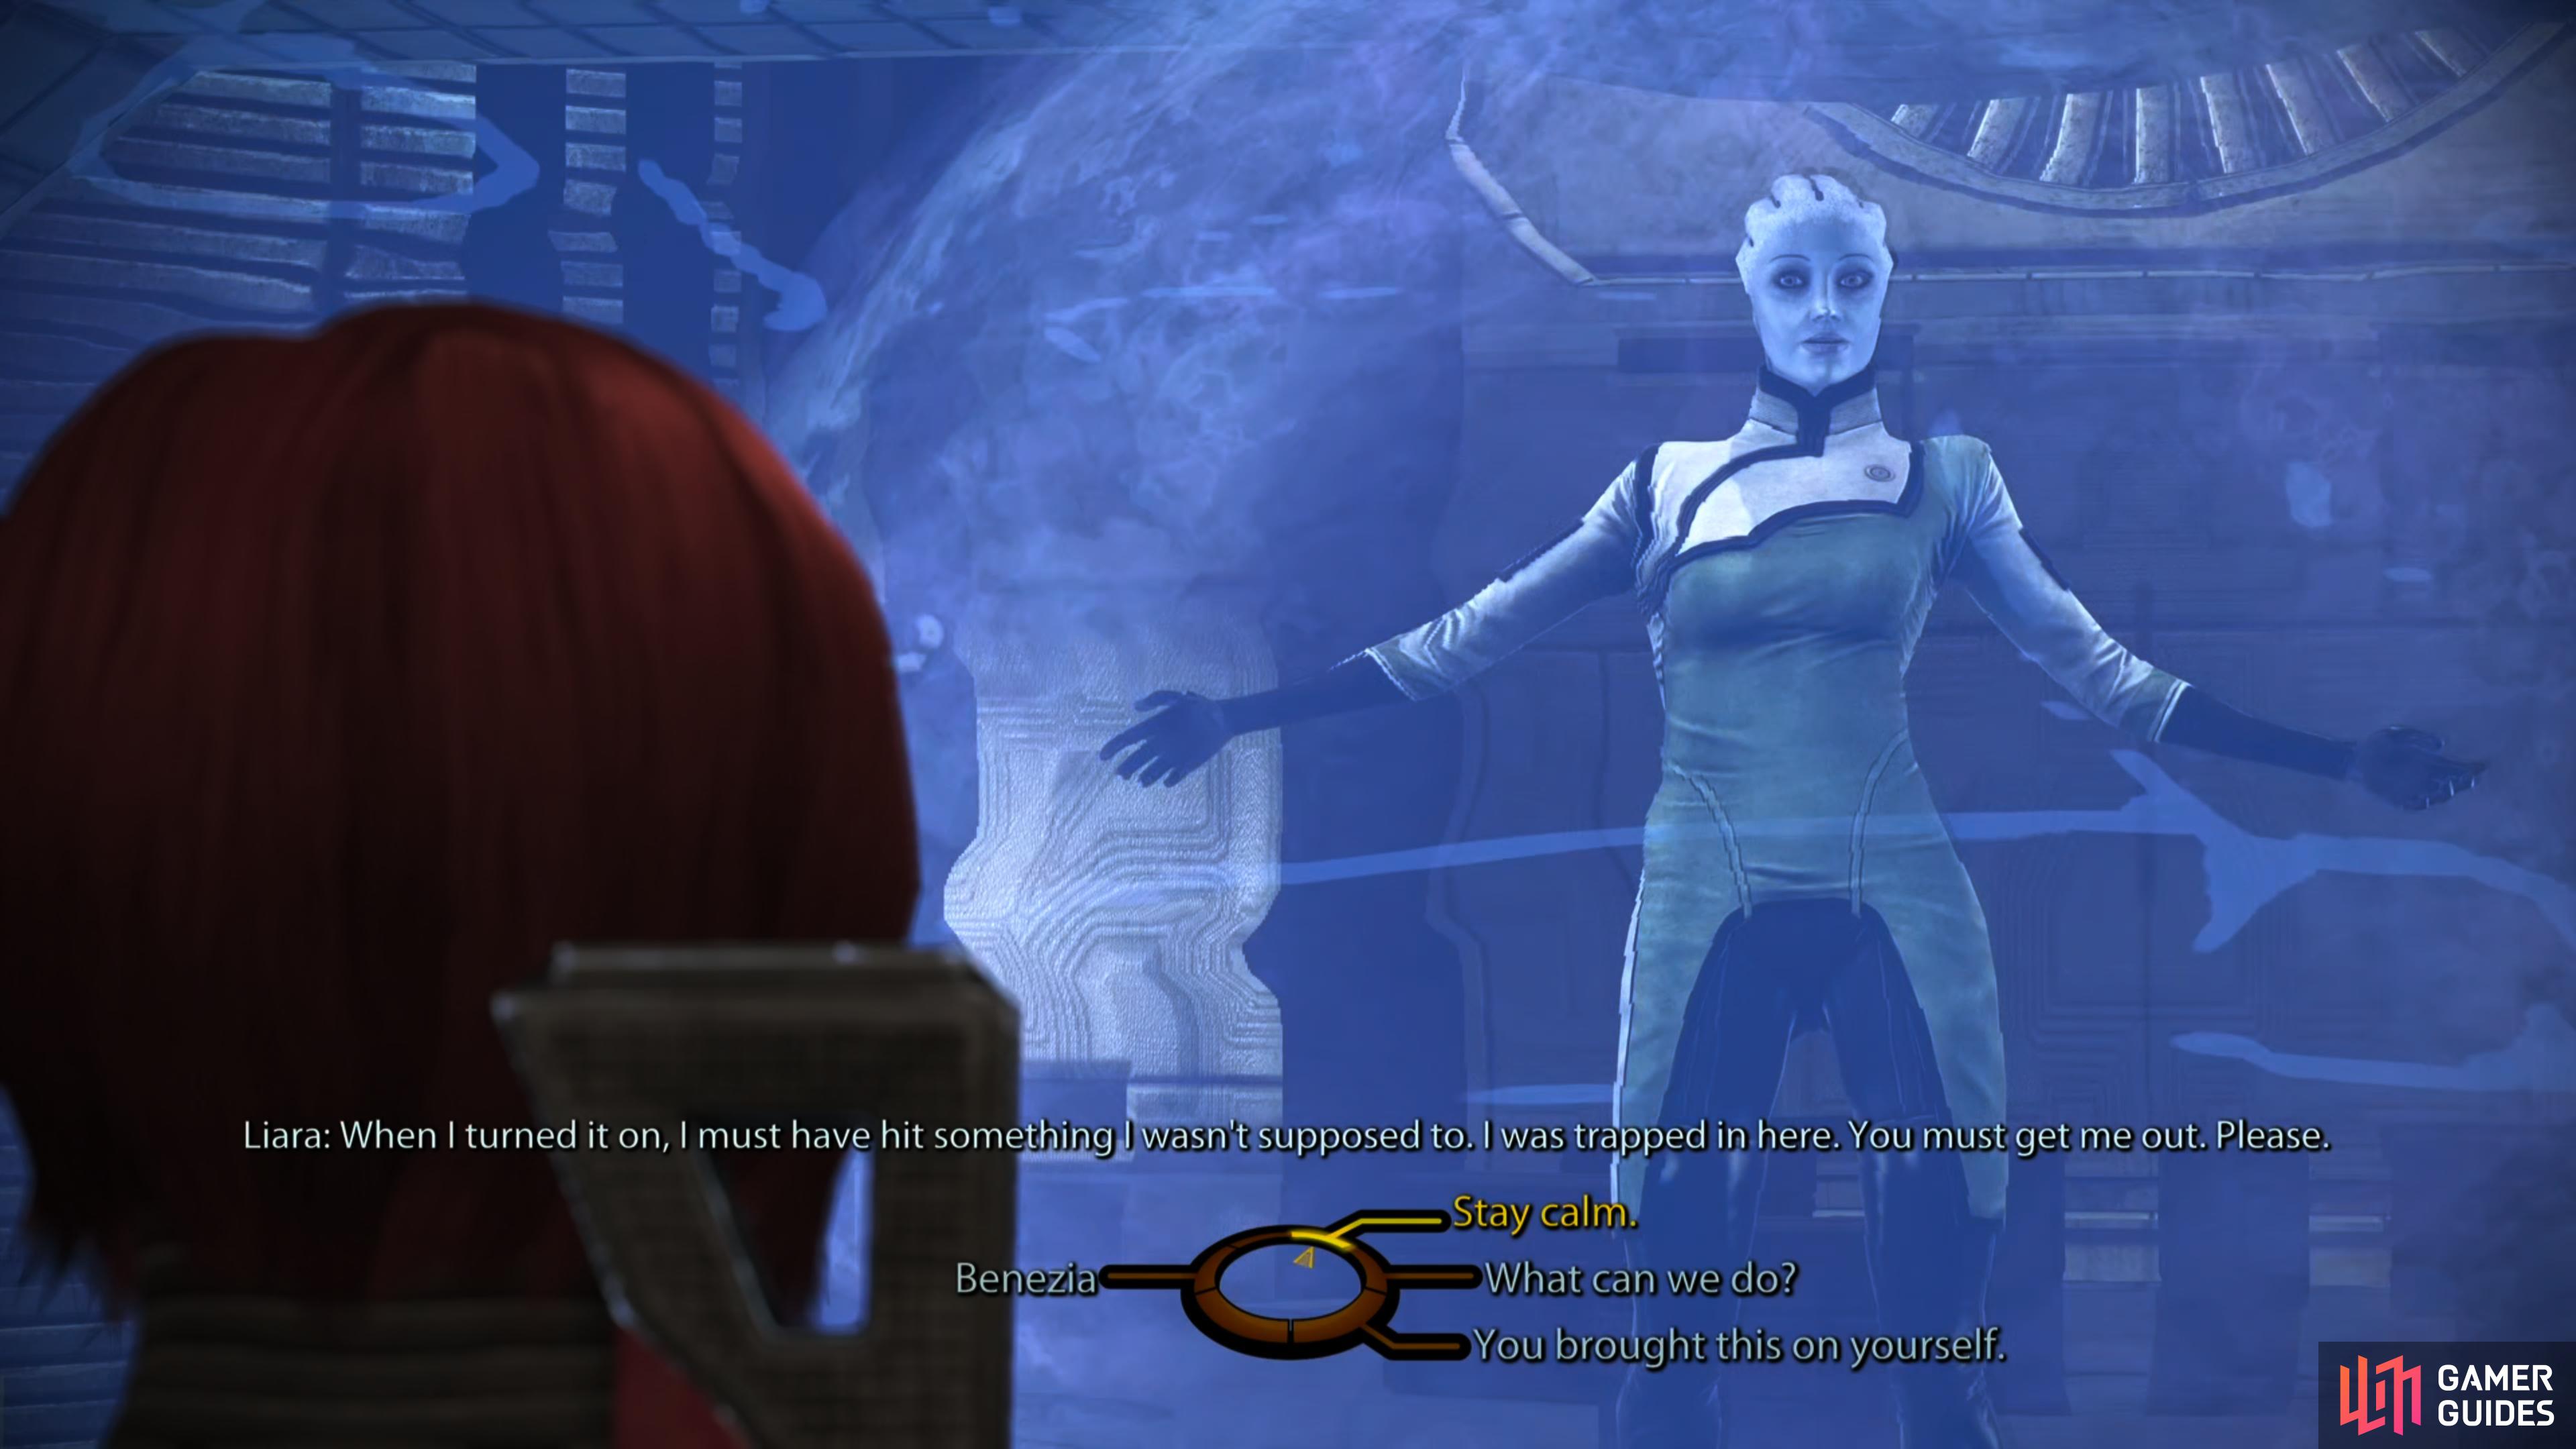 After riding a second elevator you'll stumble across a trapped Liara.